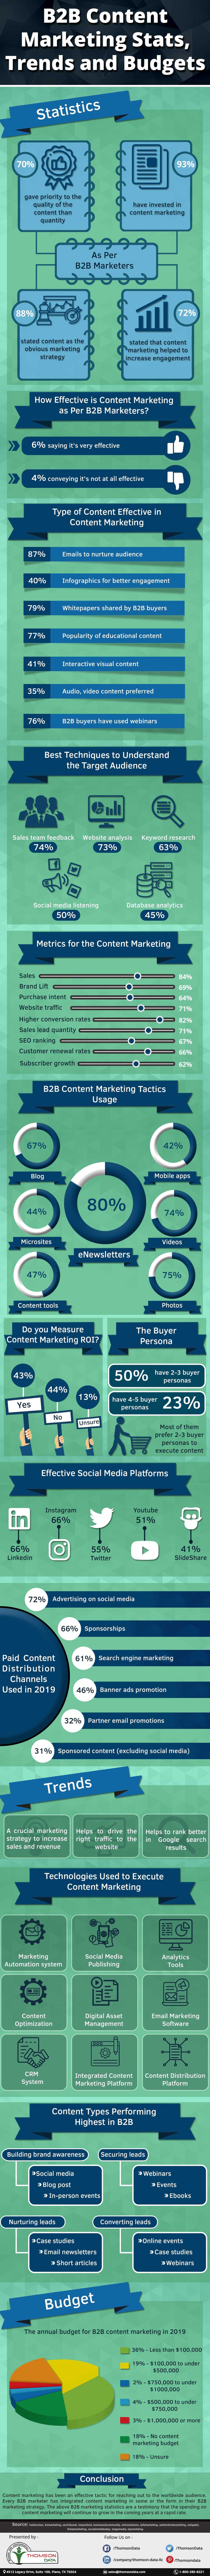 B2B Content Marketing Stats, Trends and Budgets